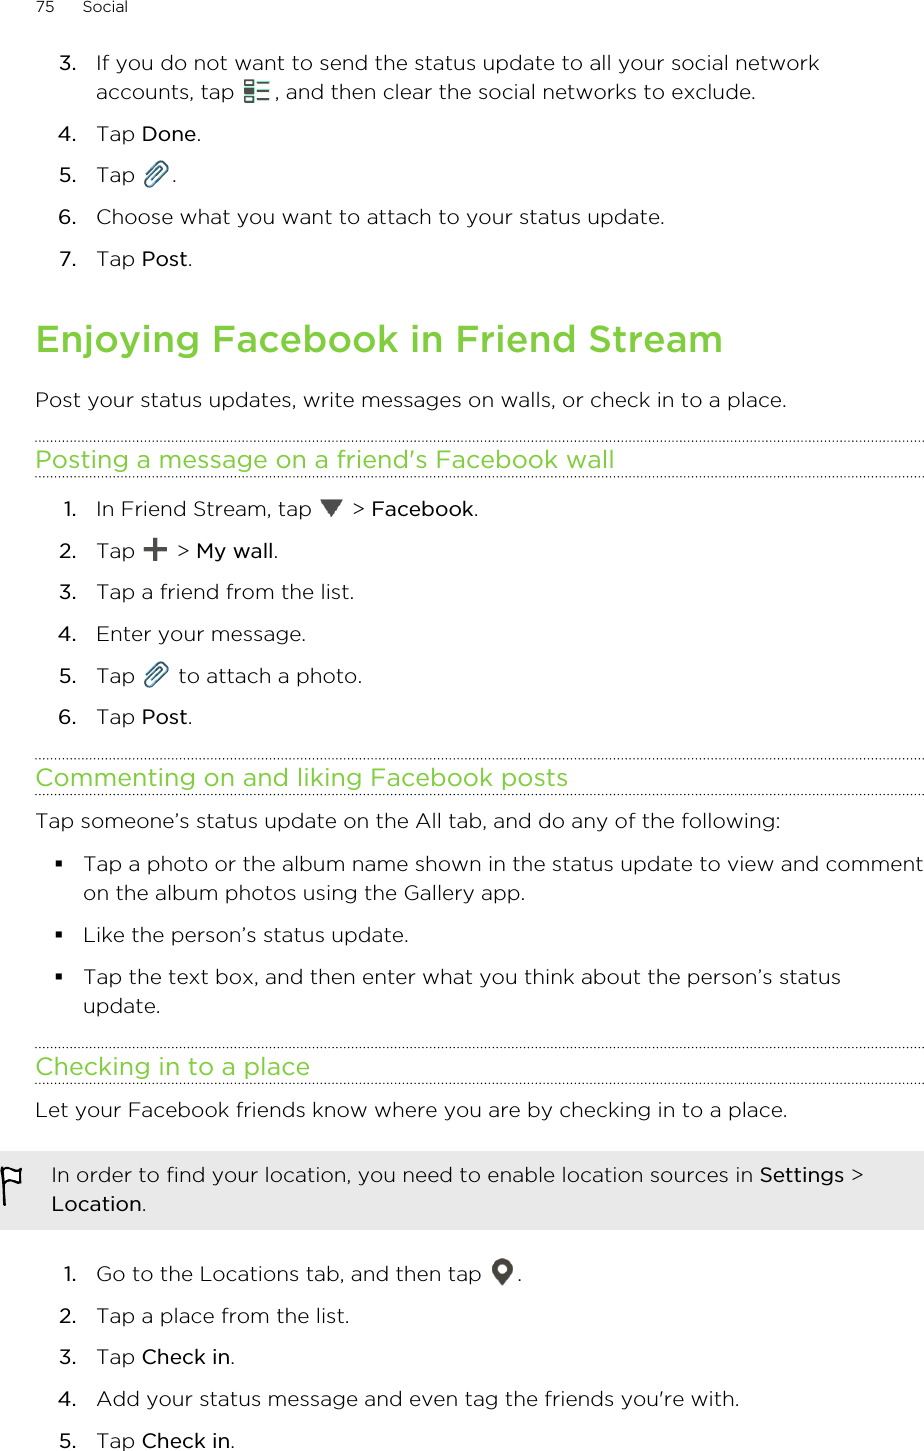 3. If you do not want to send the status update to all your social networkaccounts, tap  , and then clear the social networks to exclude.4. Tap Done.5. Tap  .6. Choose what you want to attach to your status update.7. Tap Post.Enjoying Facebook in Friend StreamPost your status updates, write messages on walls, or check in to a place.Posting a message on a friend&apos;s Facebook wall1. In Friend Stream, tap   &gt; Facebook.2. Tap   &gt; My wall.3. Tap a friend from the list.4. Enter your message.5. Tap   to attach a photo.6. Tap Post.Commenting on and liking Facebook postsTap someone’s status update on the All tab, and do any of the following: §Tap a photo or the album name shown in the status update to view and commenton the album photos using the Gallery app.§Like the person’s status update.§Tap the text box, and then enter what you think about the person’s statusupdate.Checking in to a placeLet your Facebook friends know where you are by checking in to a place.In order to find your location, you need to enable location sources in Settings &gt;Location.1. Go to the Locations tab, and then tap  .2. Tap a place from the list.3. Tap Check in.4. Add your status message and even tag the friends you&apos;re with.5. Tap Check in.75 Social